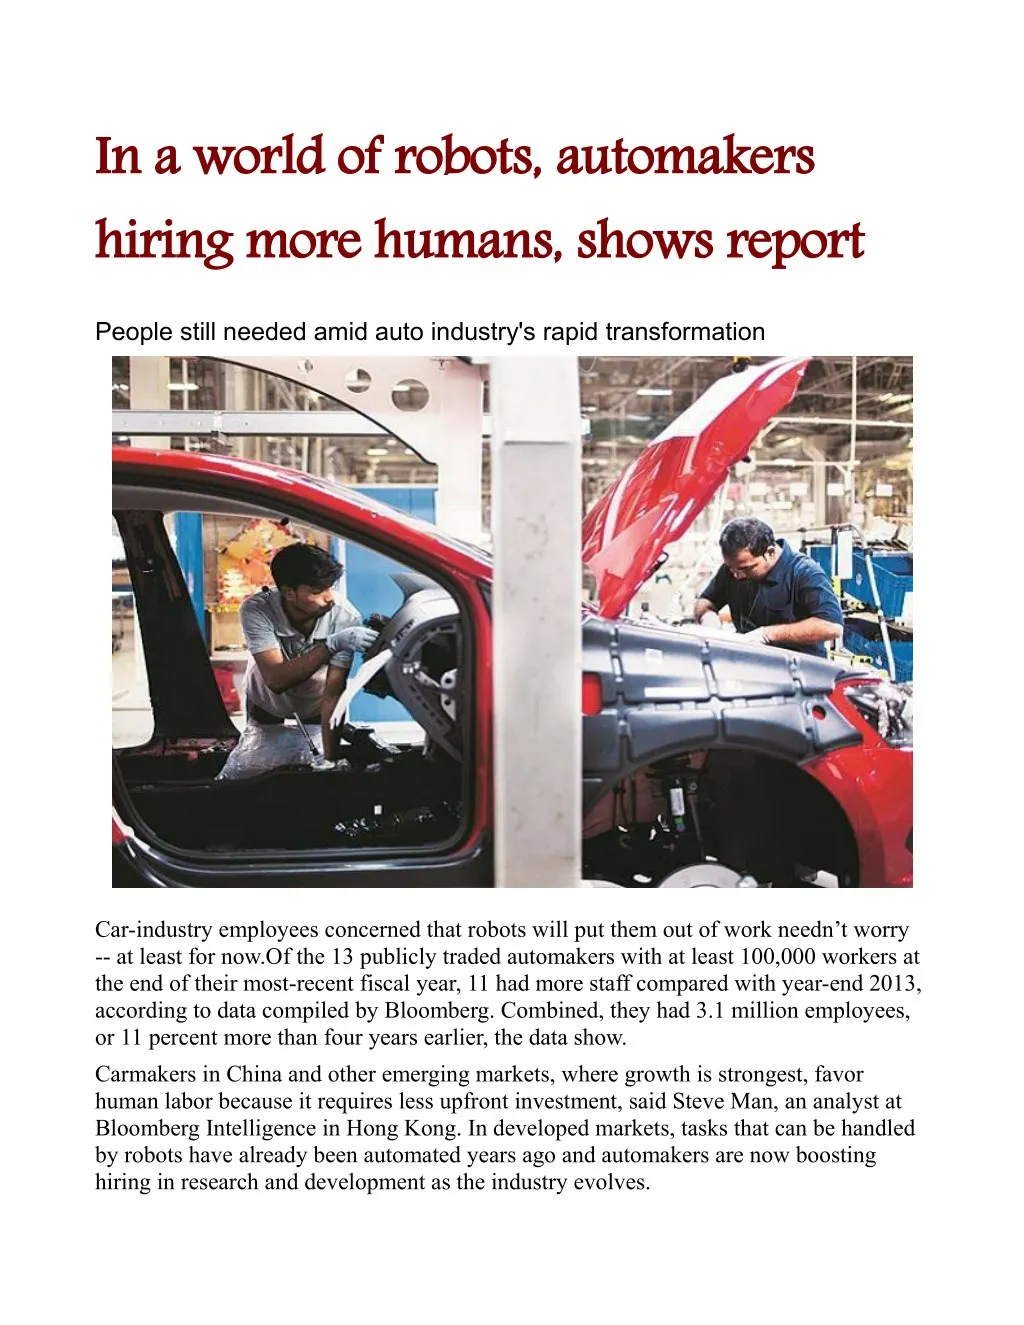 in a world of robots automakers hiring more